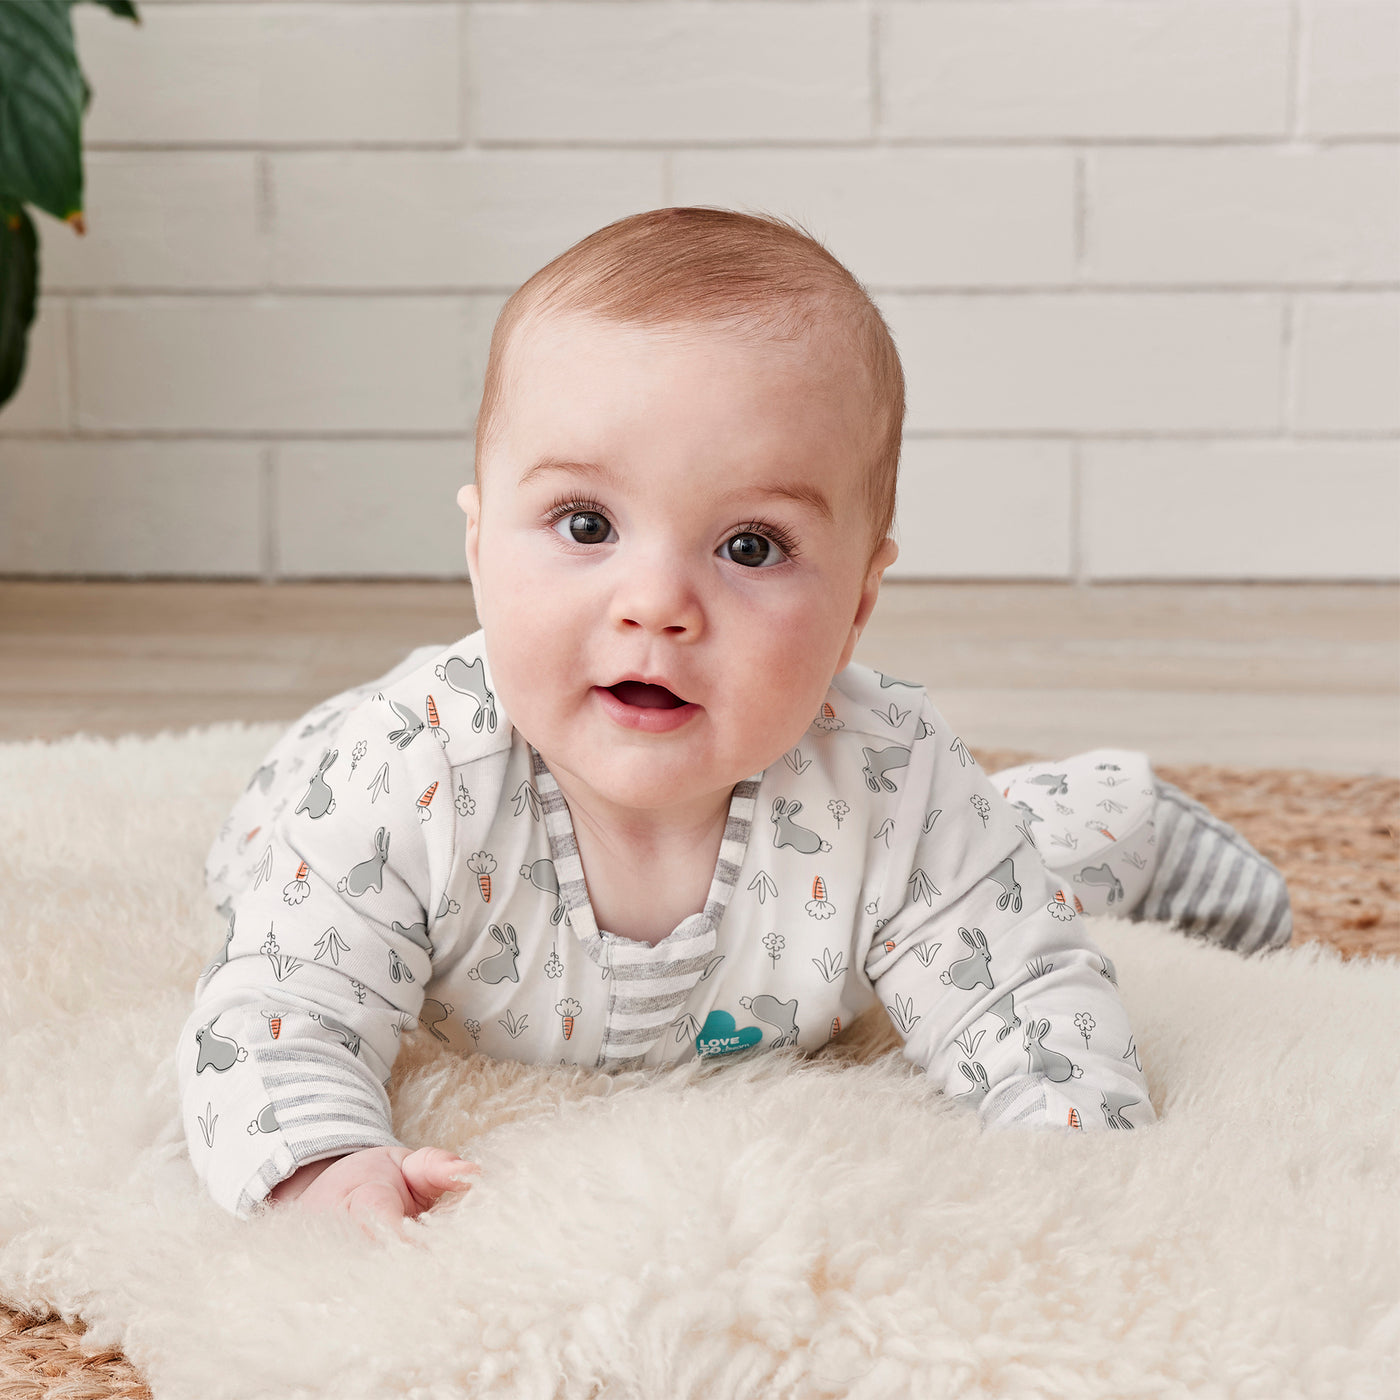 The Love To Dream™ Romper has been designed for all day comfort through sleep & play. With enclosed feet and convertible sleeves, this onesie style romper is perfect on its own, or for layering under Love To Dream™ sleepwear. Online exclusive range.